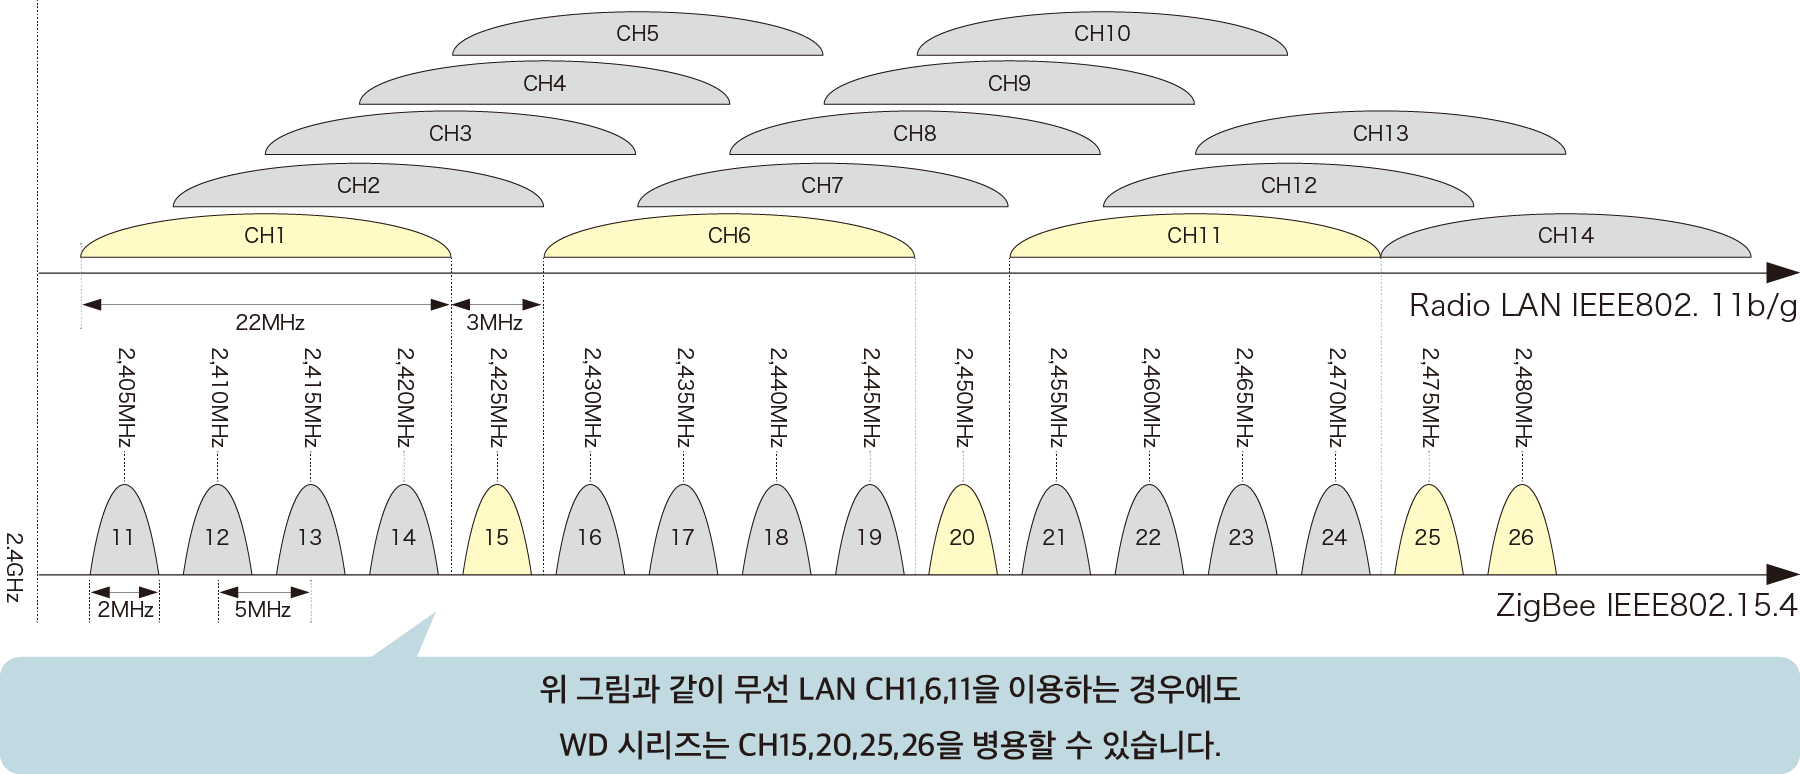 As shown in the figure above, when using the radio LAN CH1, 6 and 11, the WD-series is also available.
 CH15, 20, 25, and 26 can be used together.